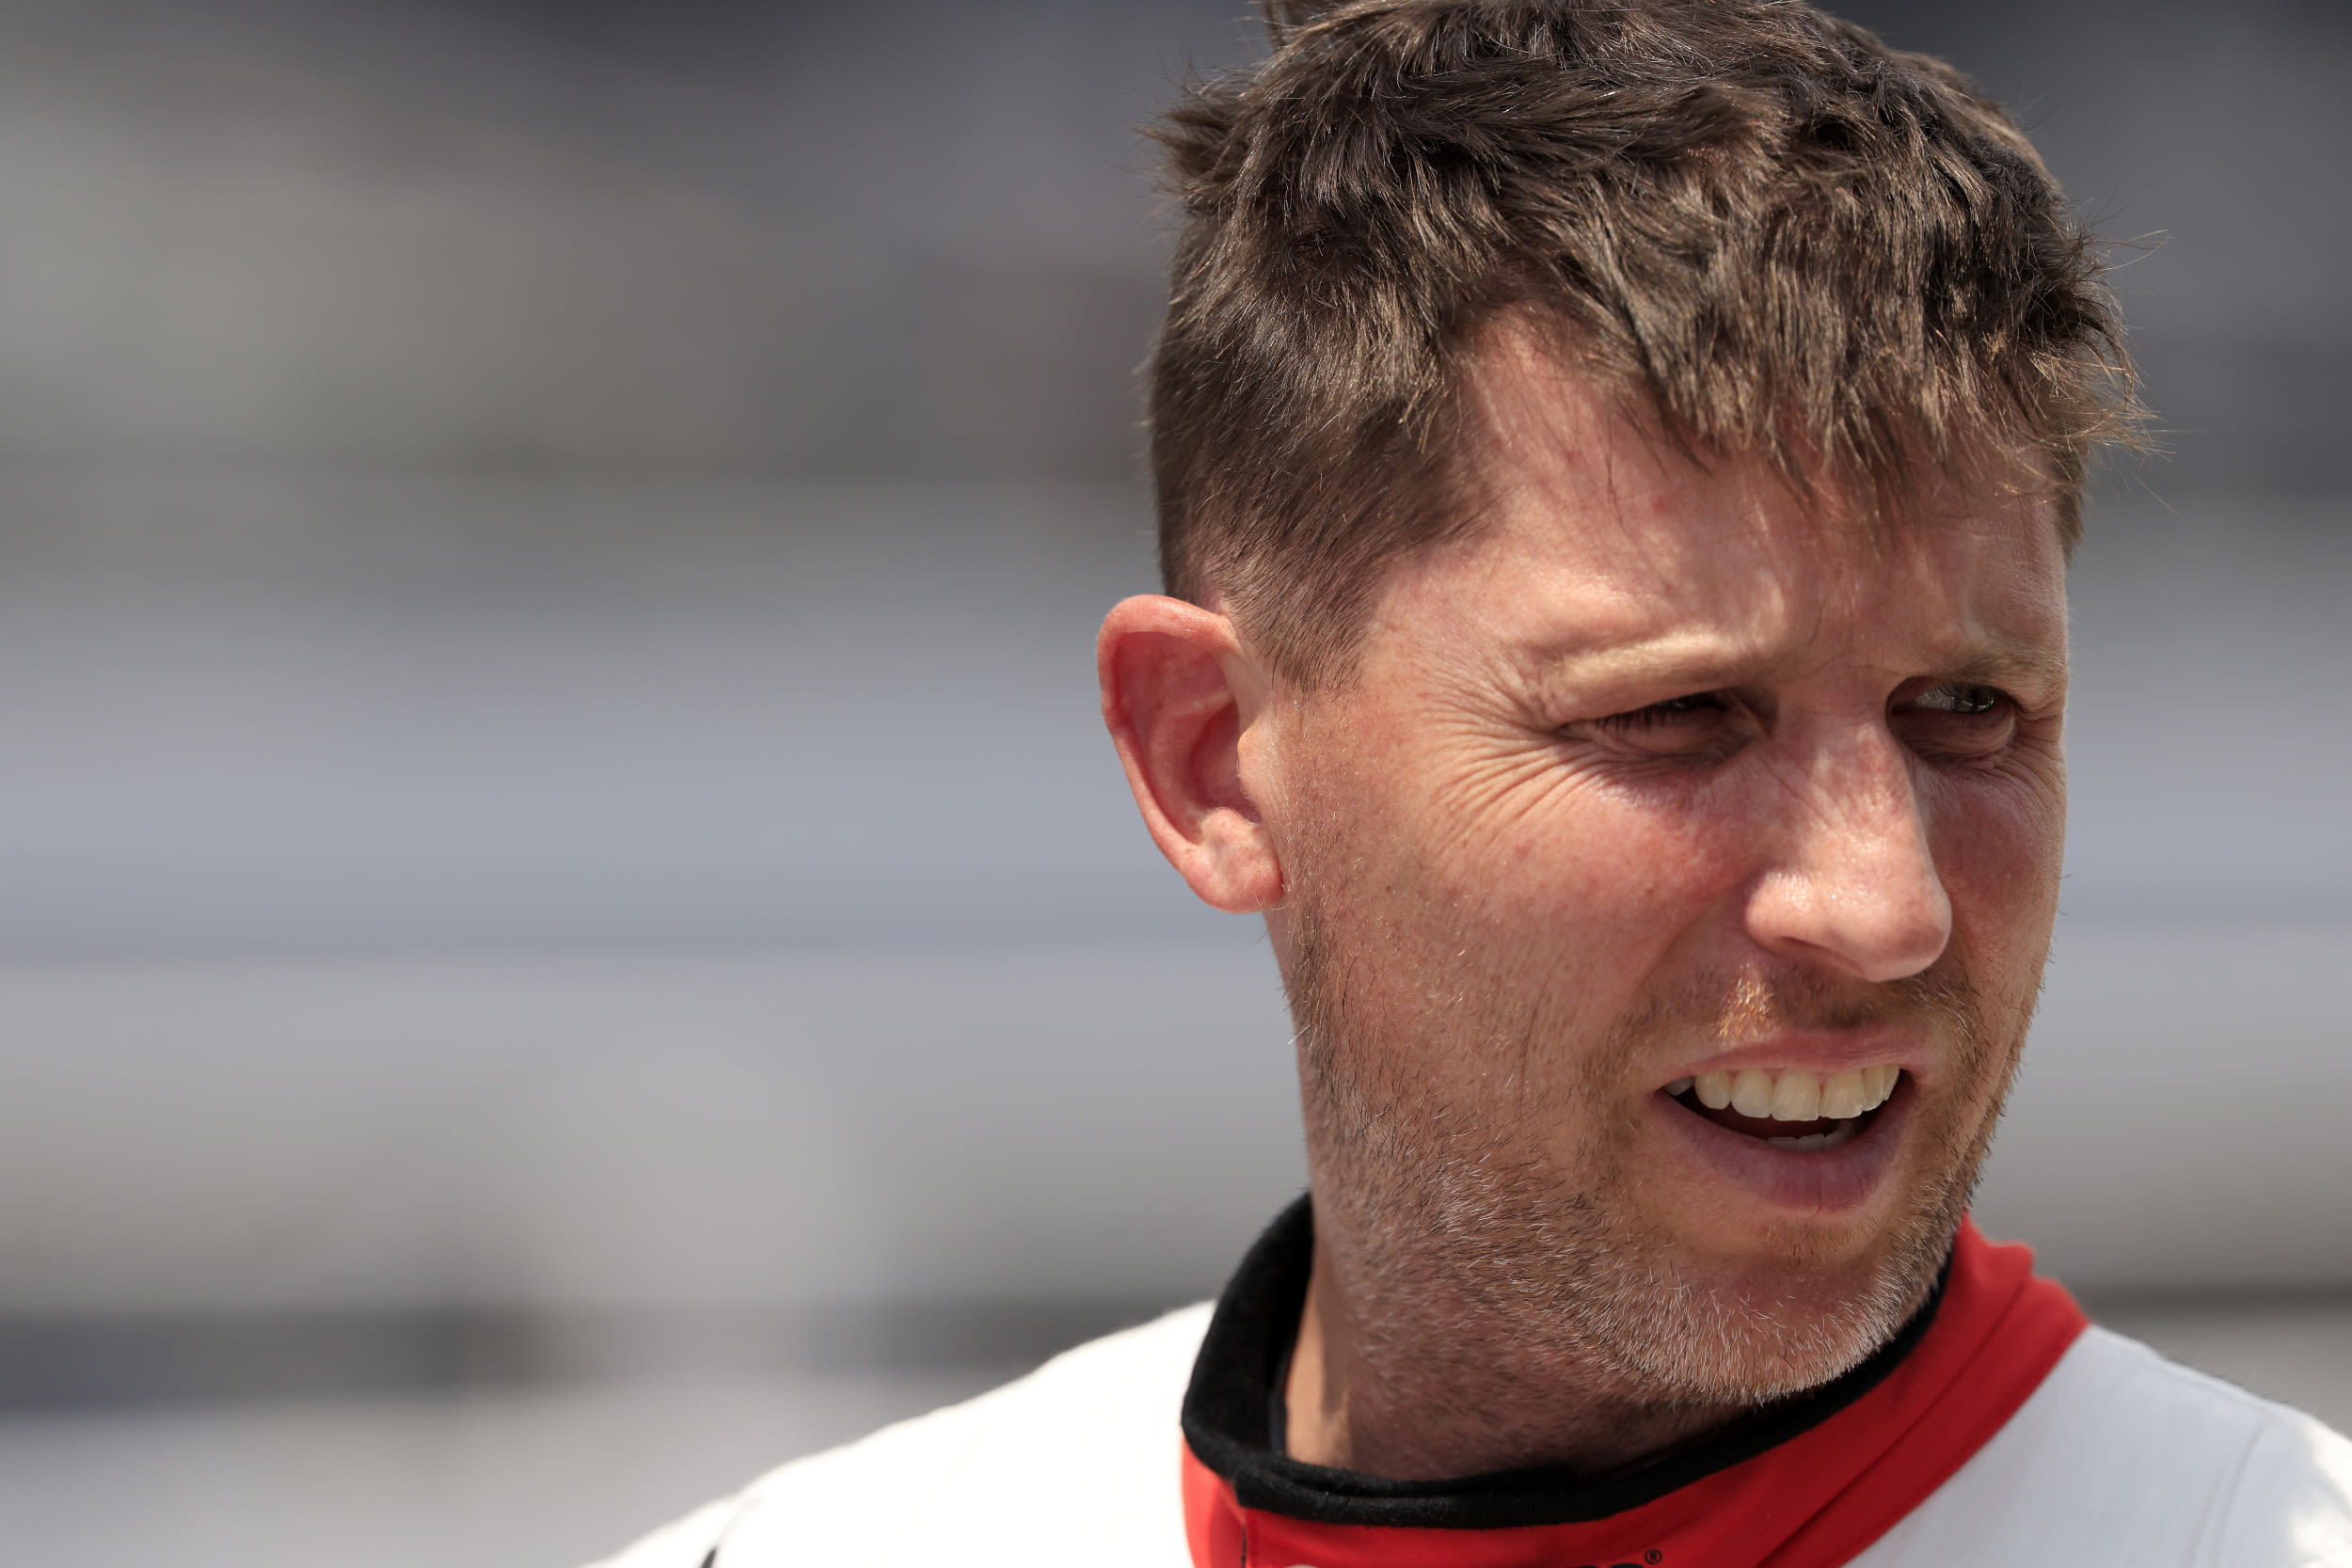 NASCAR News: Denny Hamlin Lashes Out at Viewers: 'You Didn't Say S**t!'